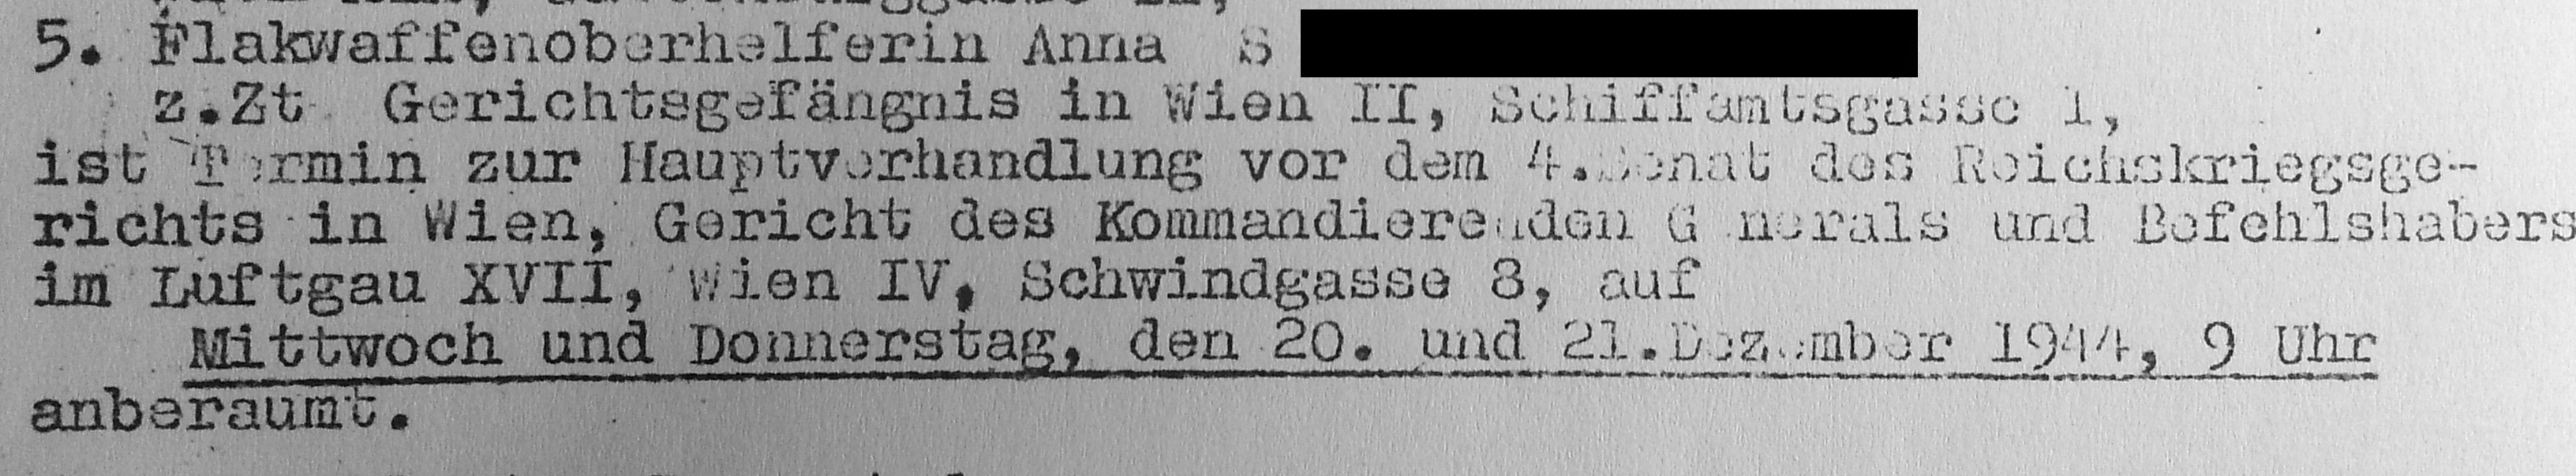 Excerpt from a notice of legal proceedings against members of a Styrian resistance group (OFF) regarding a court trial on Schwindgasse 8 (source: DÖW 21062/85C)